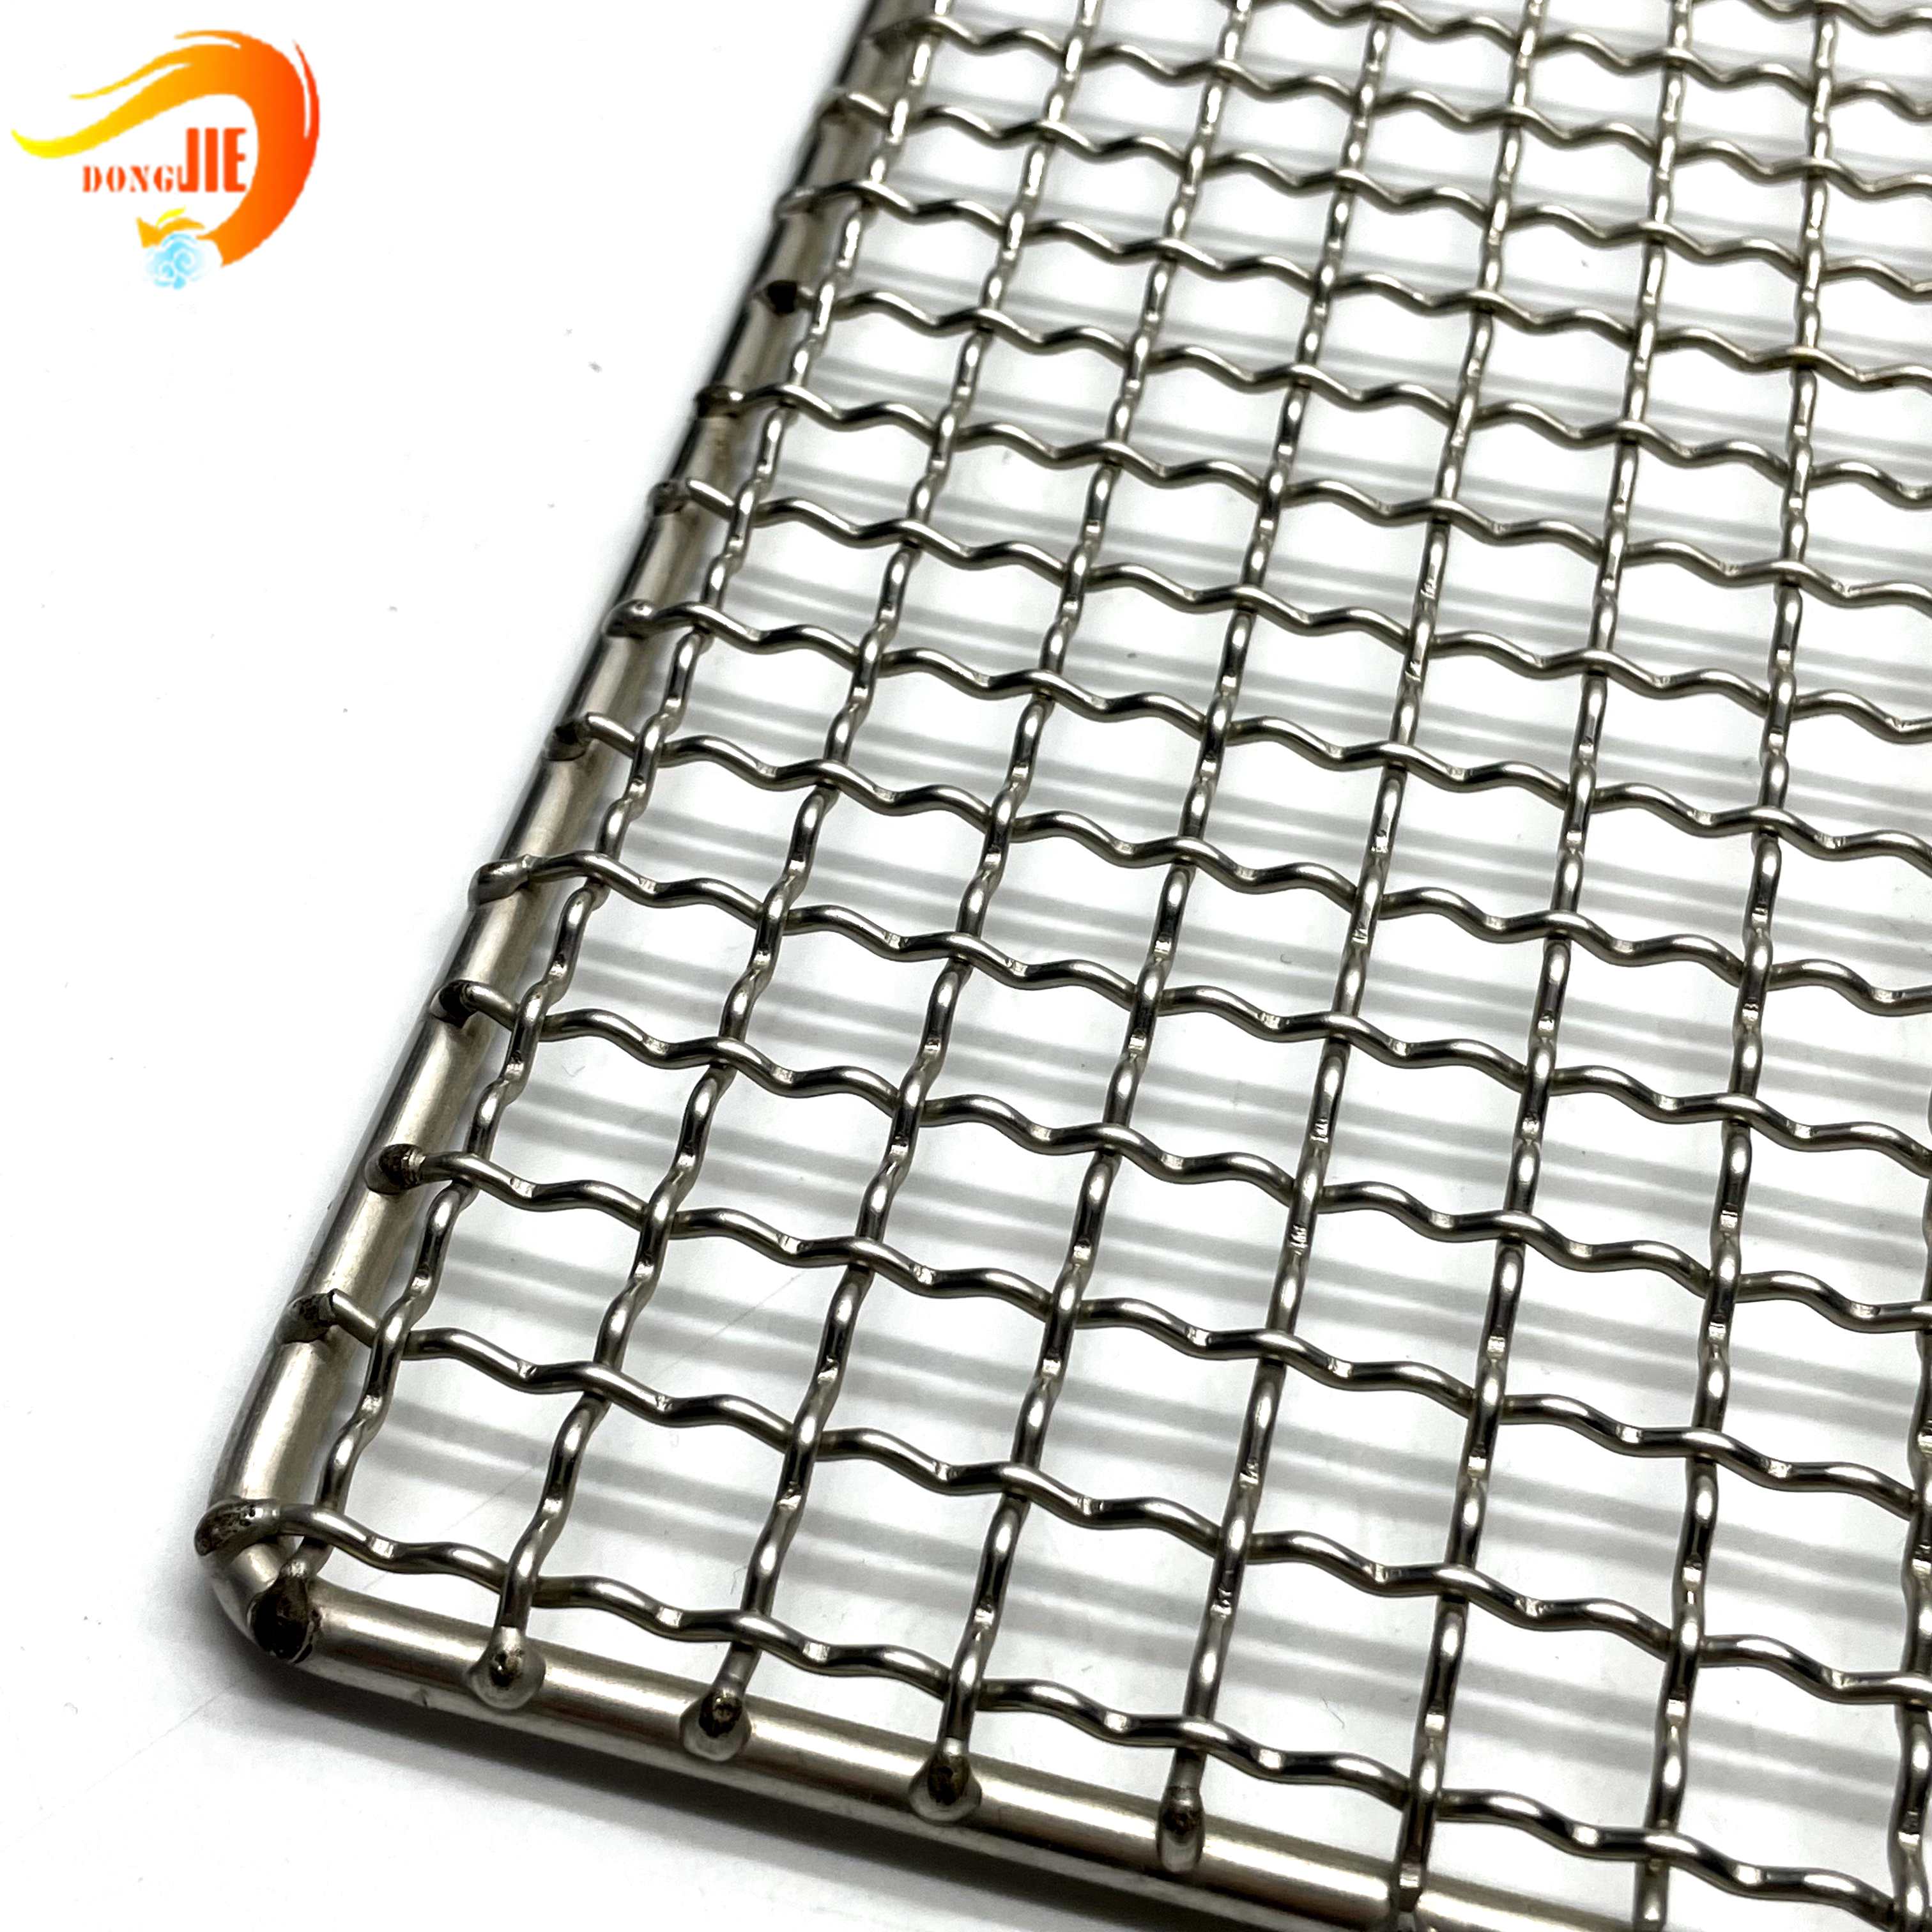 Introduction of BBQ crimped mesh